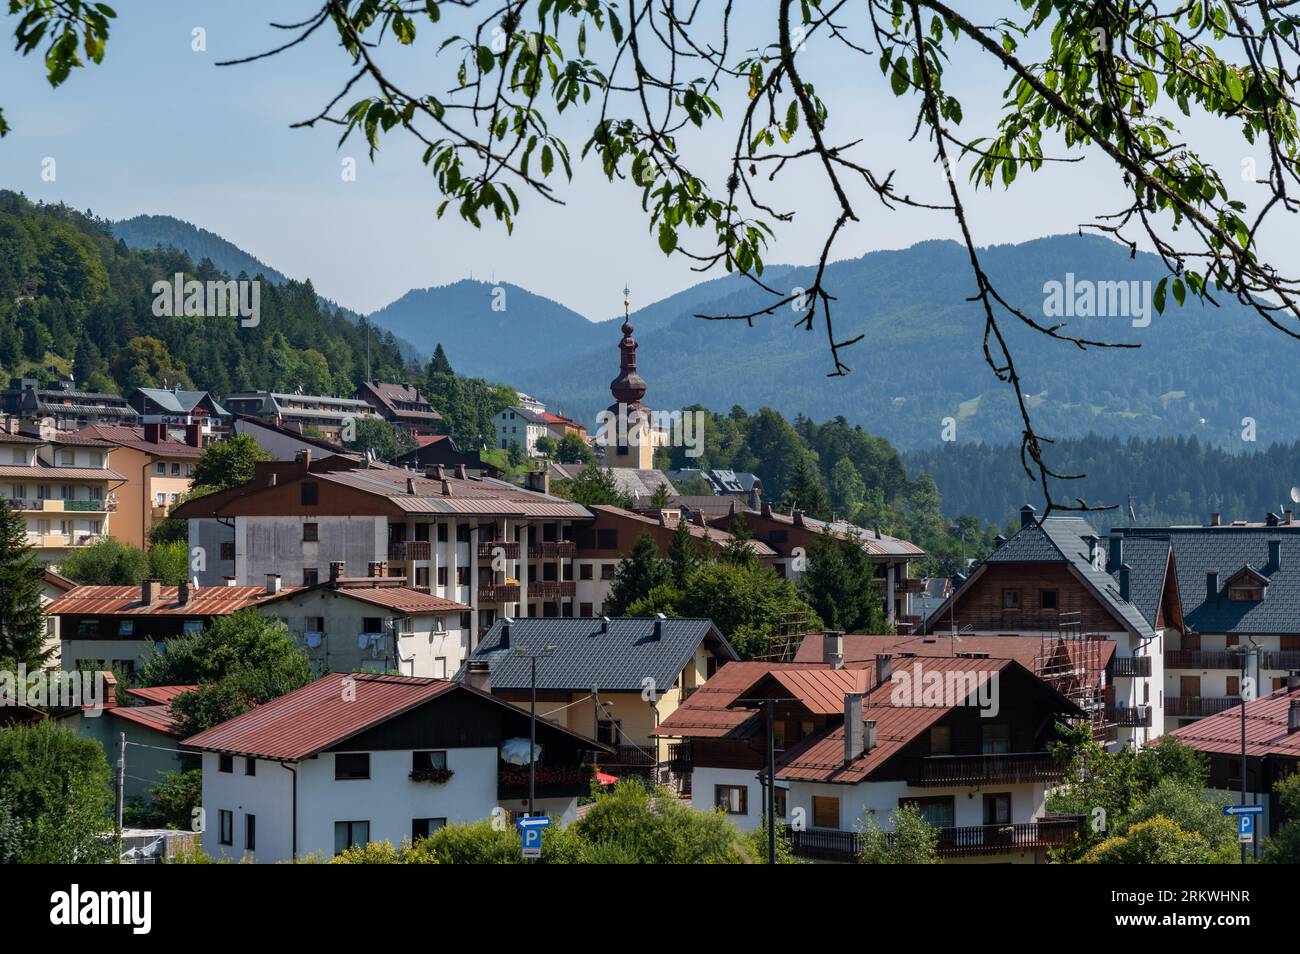 Landscape view of the alpine town of Tarvisio, in Italy Stock Photo